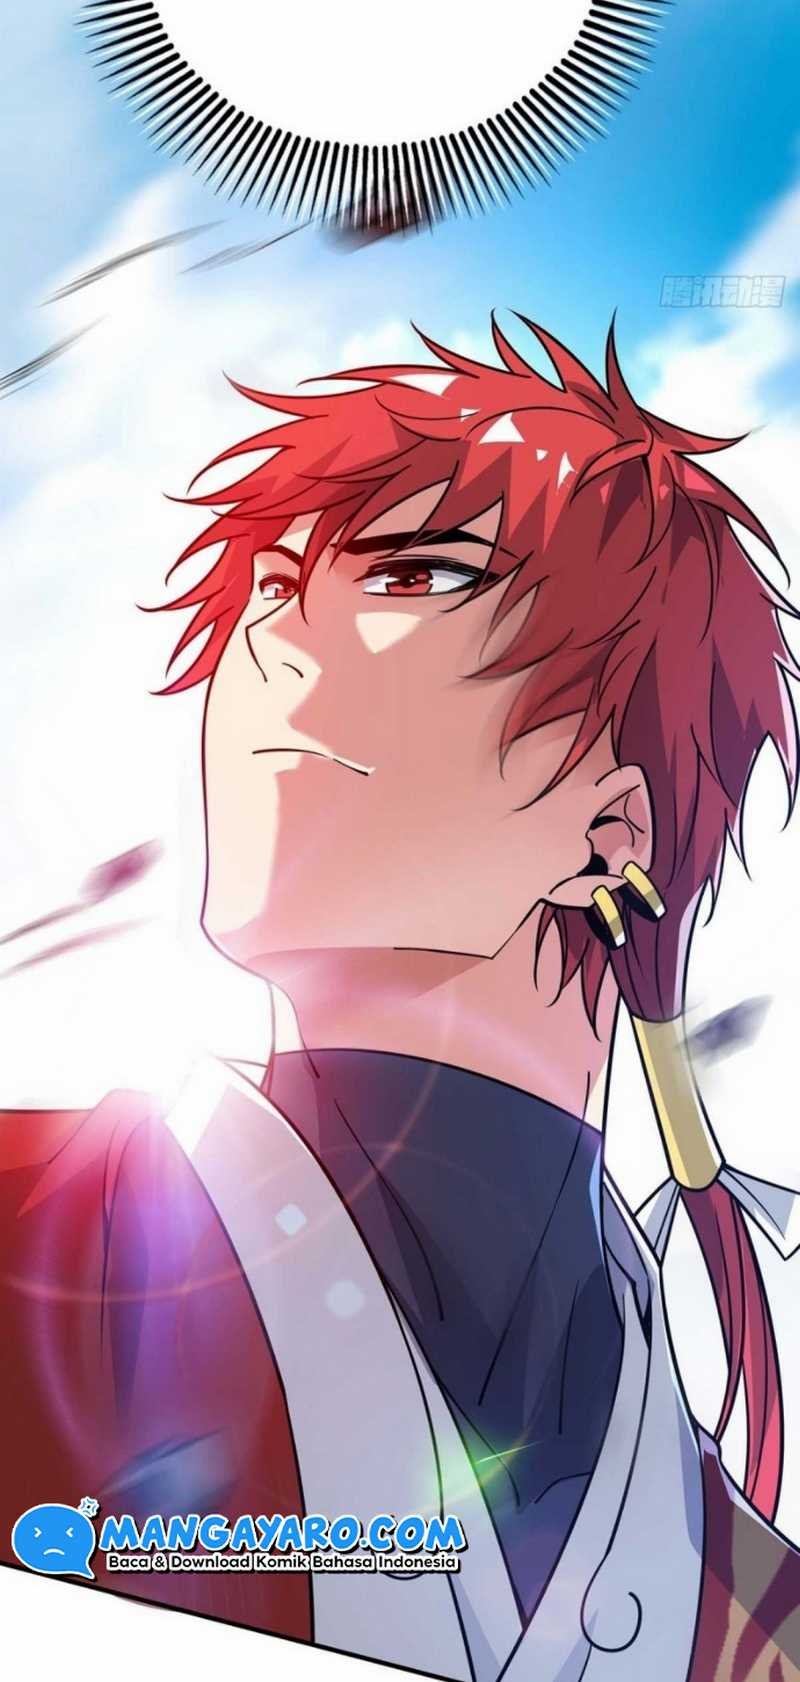 The First Son-In-Law Vanguard of All Time Chapter 165